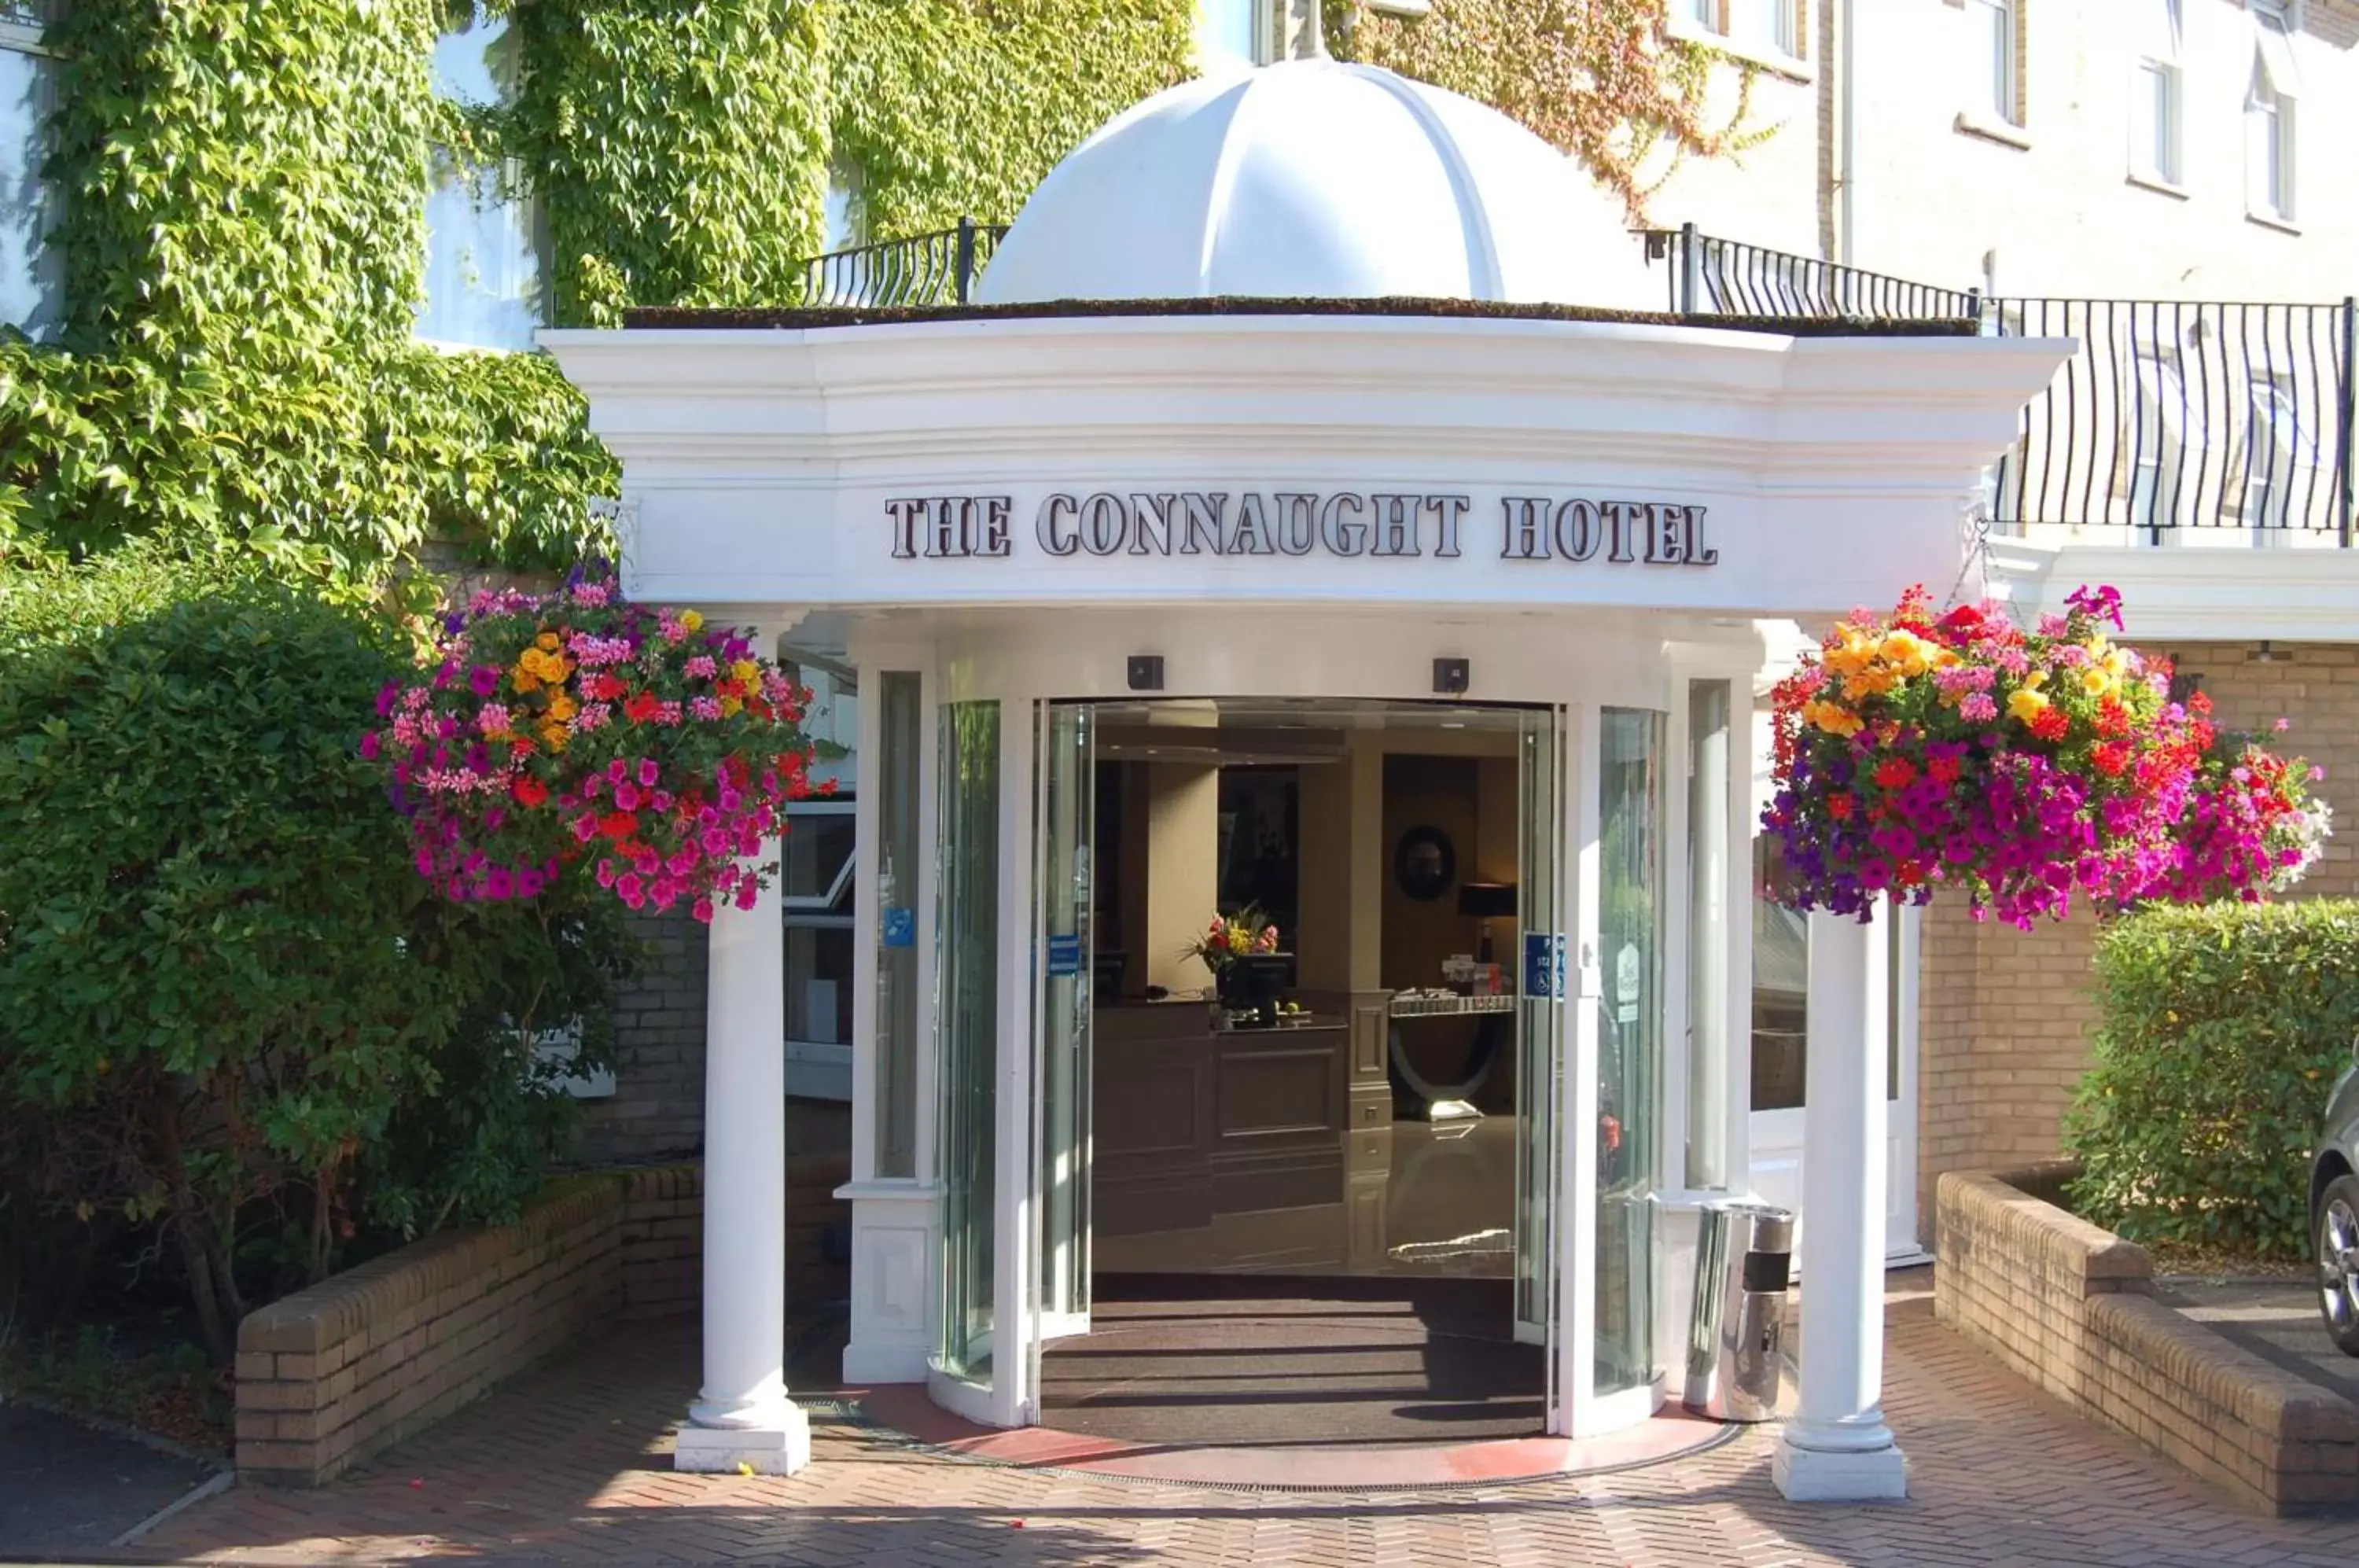 Property building in Best Western Plus The Connaught Hotel and Spa